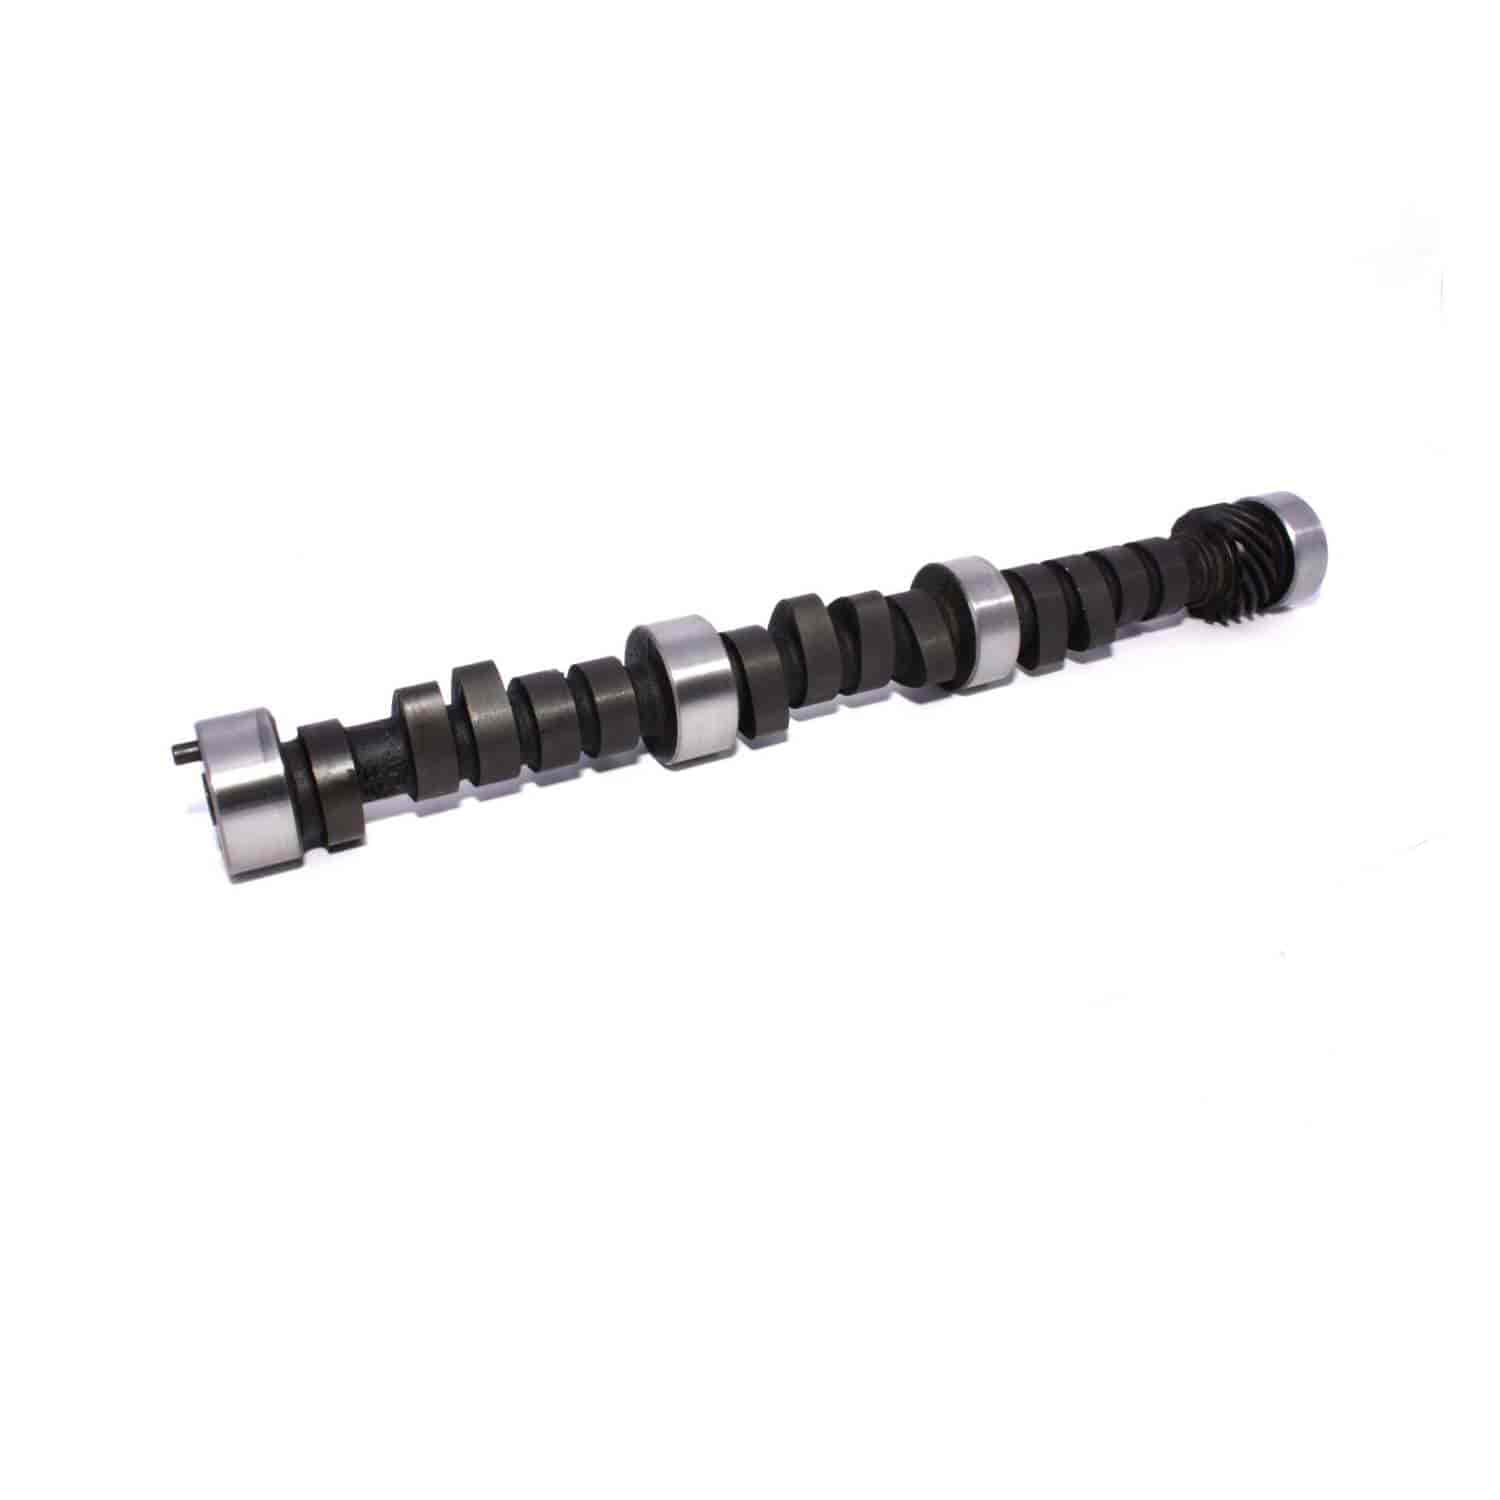 Xtreme Energy 252H Hydraulic Flat Tappet Camshaft Only Lift .425"/.425" Duration 252/252 RPM Range 800-4800